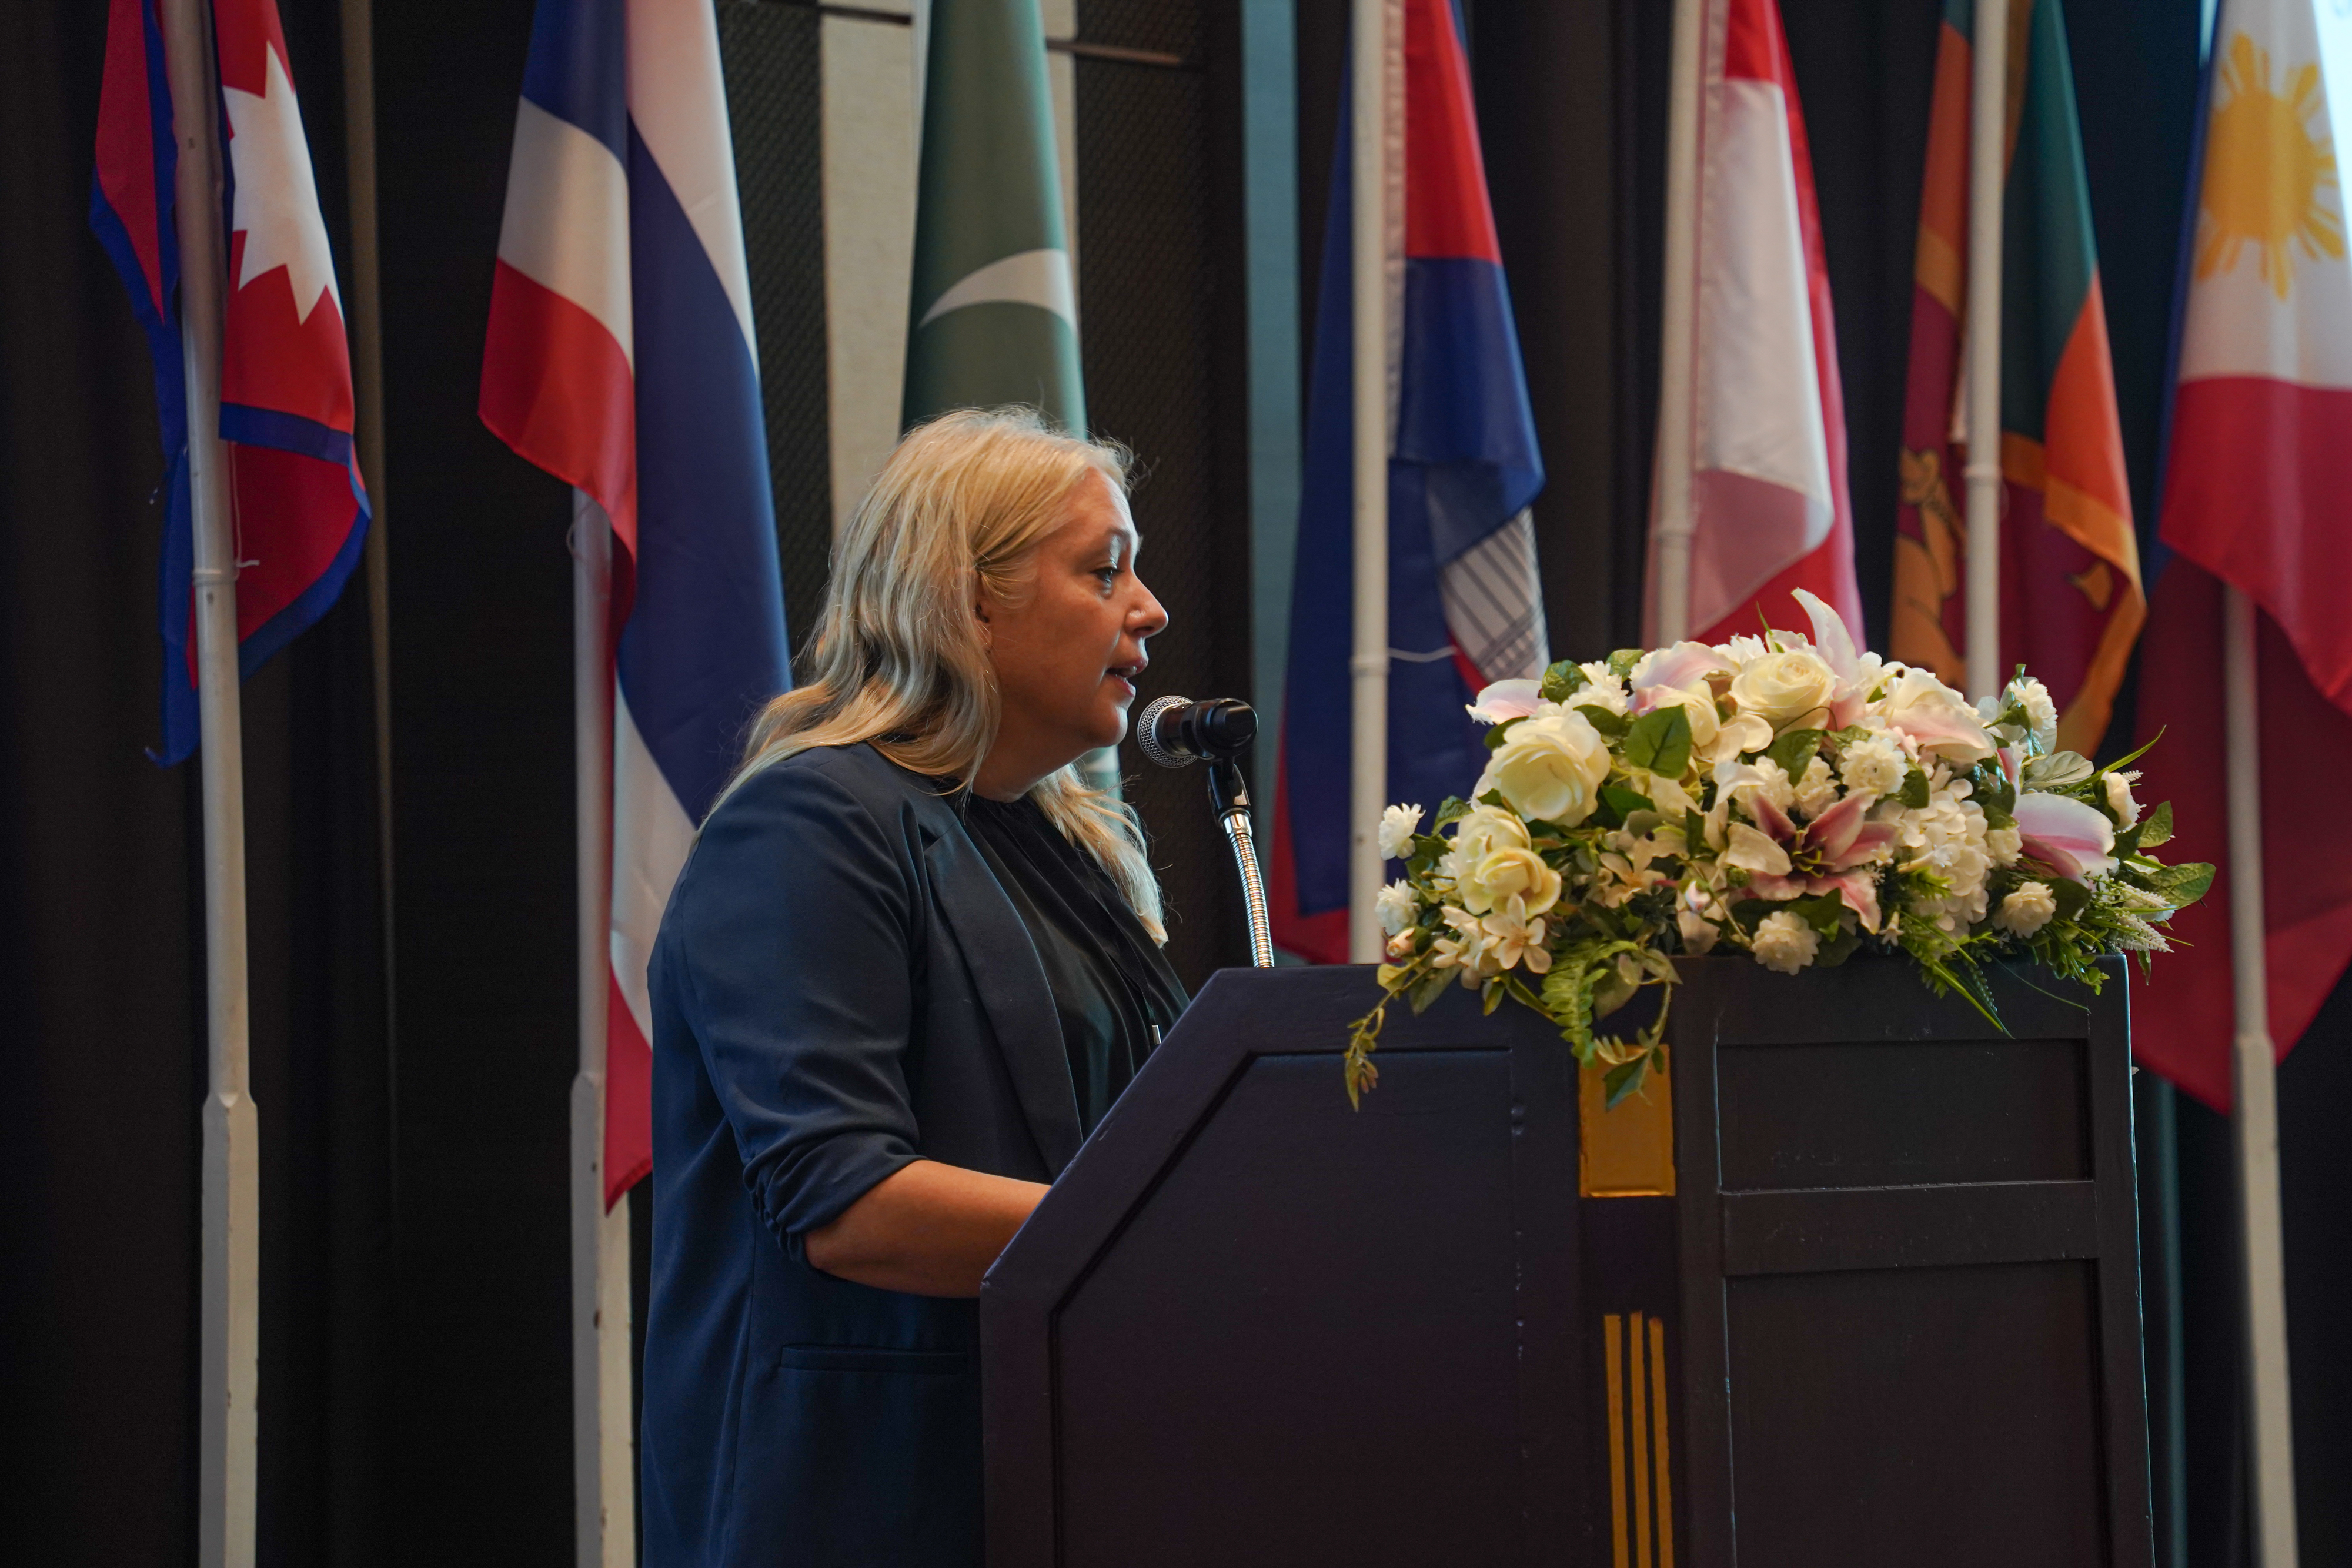 Ms. Erica Villborg, Second Secretary for Swedish Regional Development Cooperation in Asia and the Pacific Session at the Embassy of Sweden in Thailand